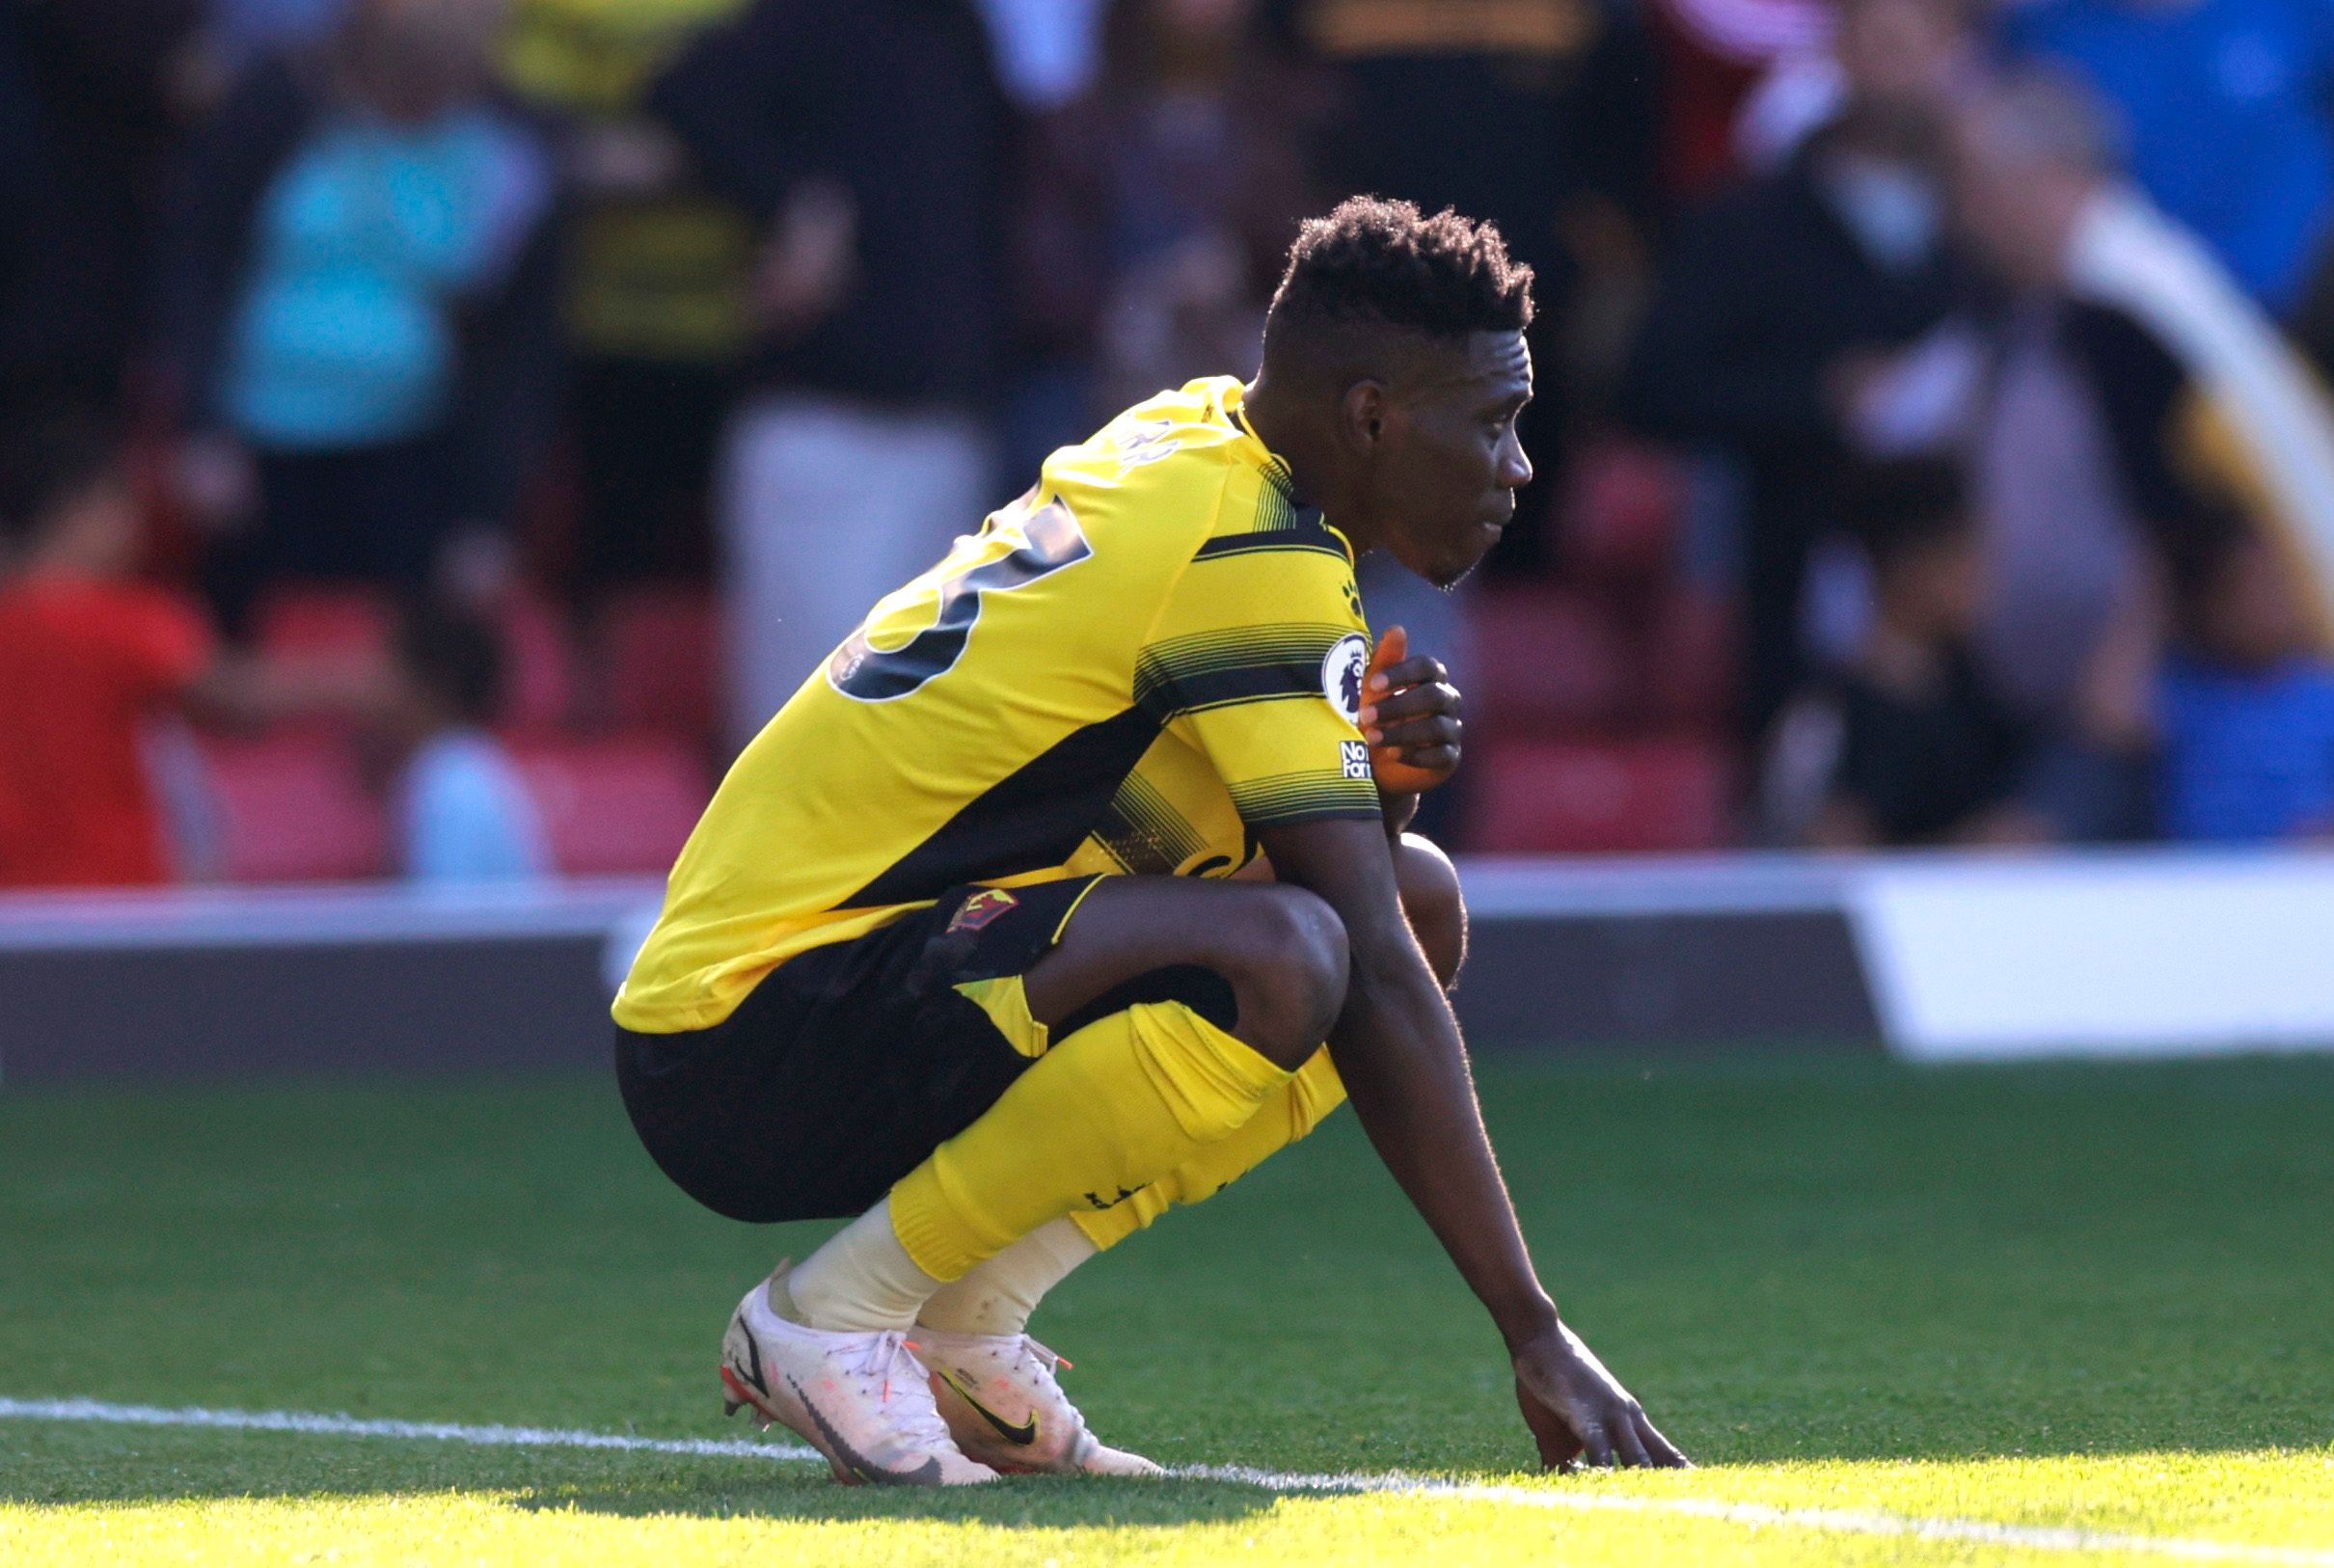 Soccer Football - Premier League - Watford v Brentford - Vicarage Road, Watford, Britain - April 16, 2022 Watford's Ismaila Sarr looks dejected after the match Action Images via Reuters/Peter Cziborra EDITORIAL USE ONLY. No use with unauthorized audio, video, data, fixture lists, club/league logos or 'live' services. Online in-match use limited to 75 images, no video emulation. No use in betting, games or single club /league/player publications.  Please contact your account representative for fu